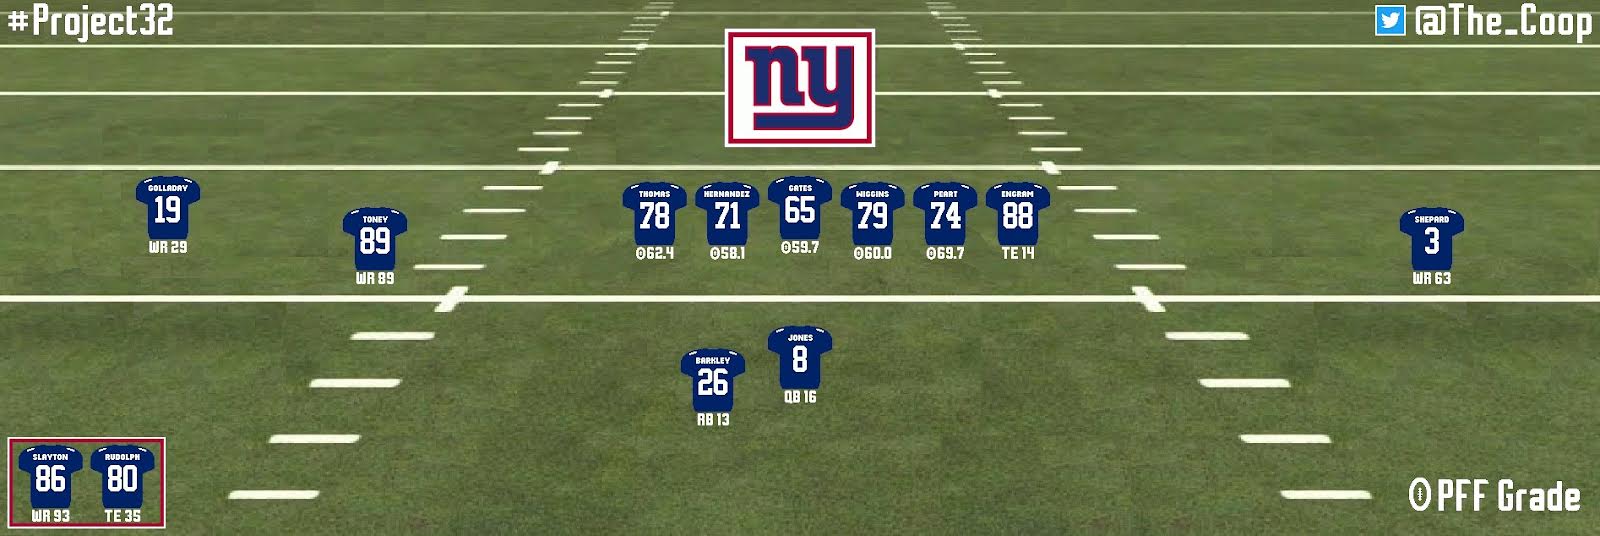 New York Giants 2021 projections